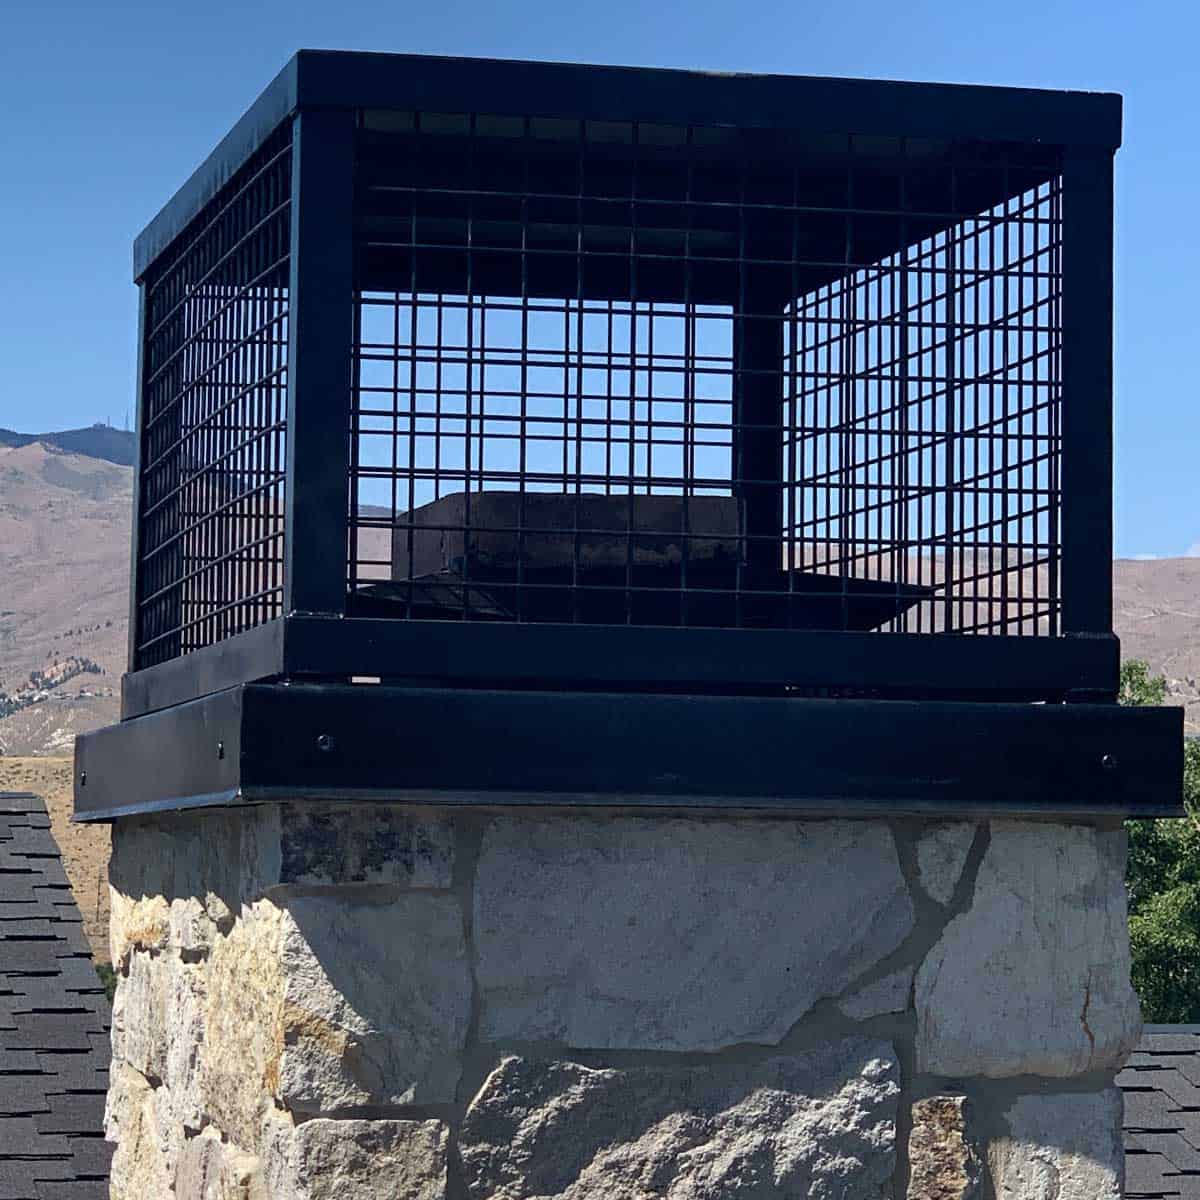 A stone chimney topped with a metal mesh cage, likely serving as a spark arrestor, with a mountainous landscape in the background.